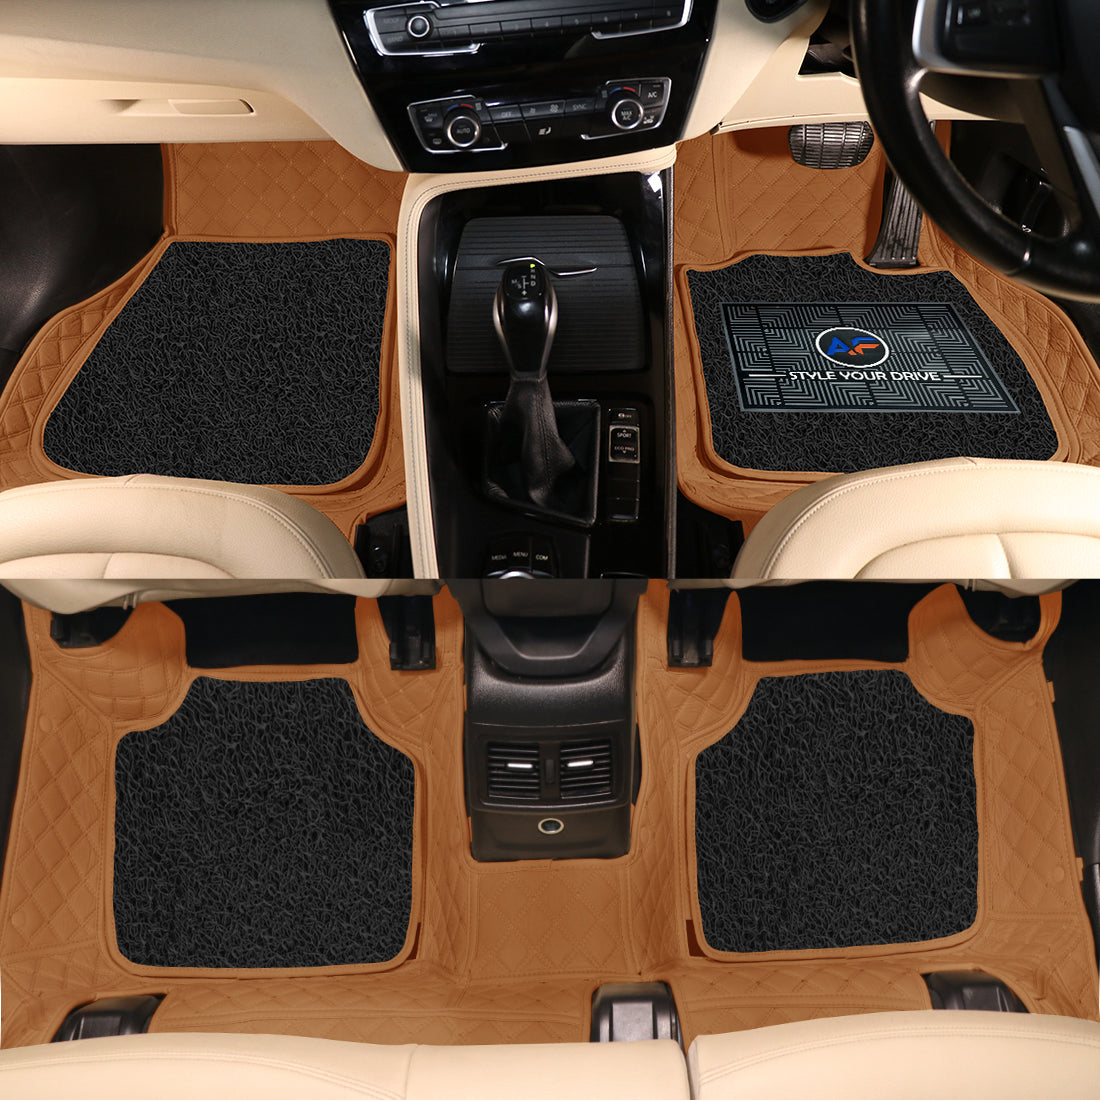 Land Rover Range Rover Evoque R-Dynamic 2020 7D Luxury Car Mat, All Weather Proof, Anti-Skid, 100% Waterproof & Odorless with Unique Diamond Fish Design (24mm Luxury PU Leather, 2 Rows)